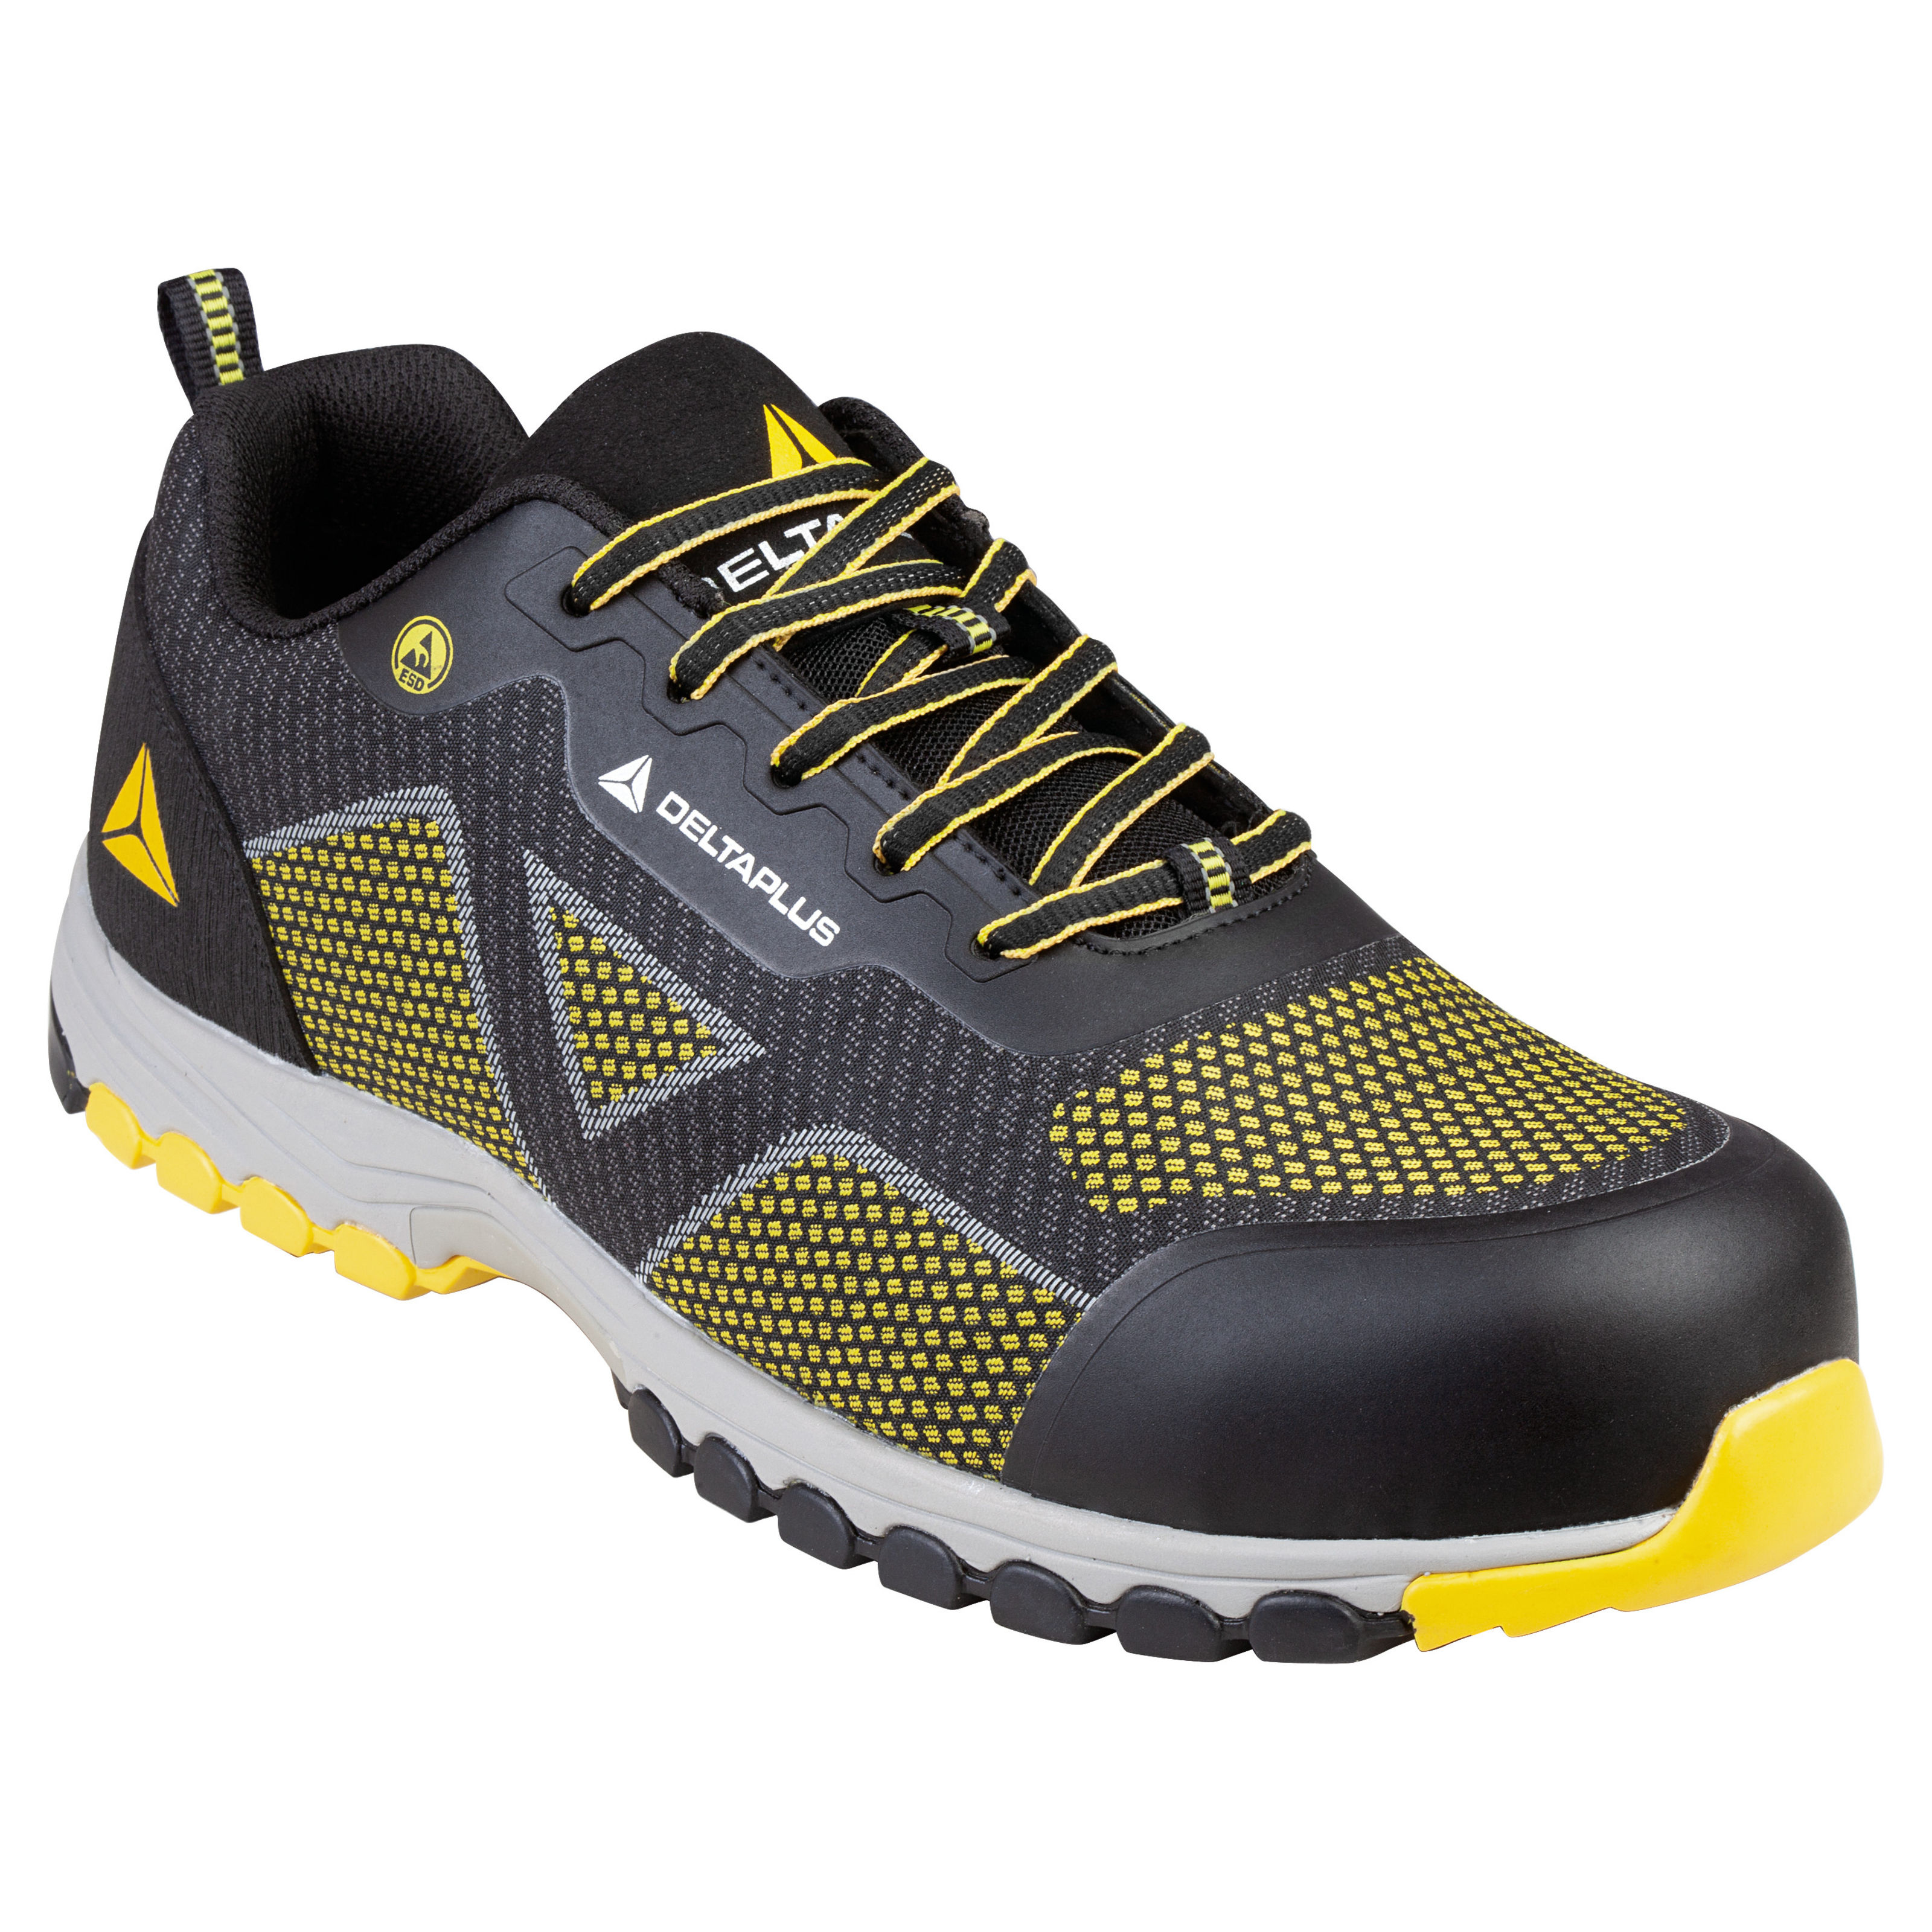 Buy The Rock Delta Men's Shoes Black Yellow (7) at